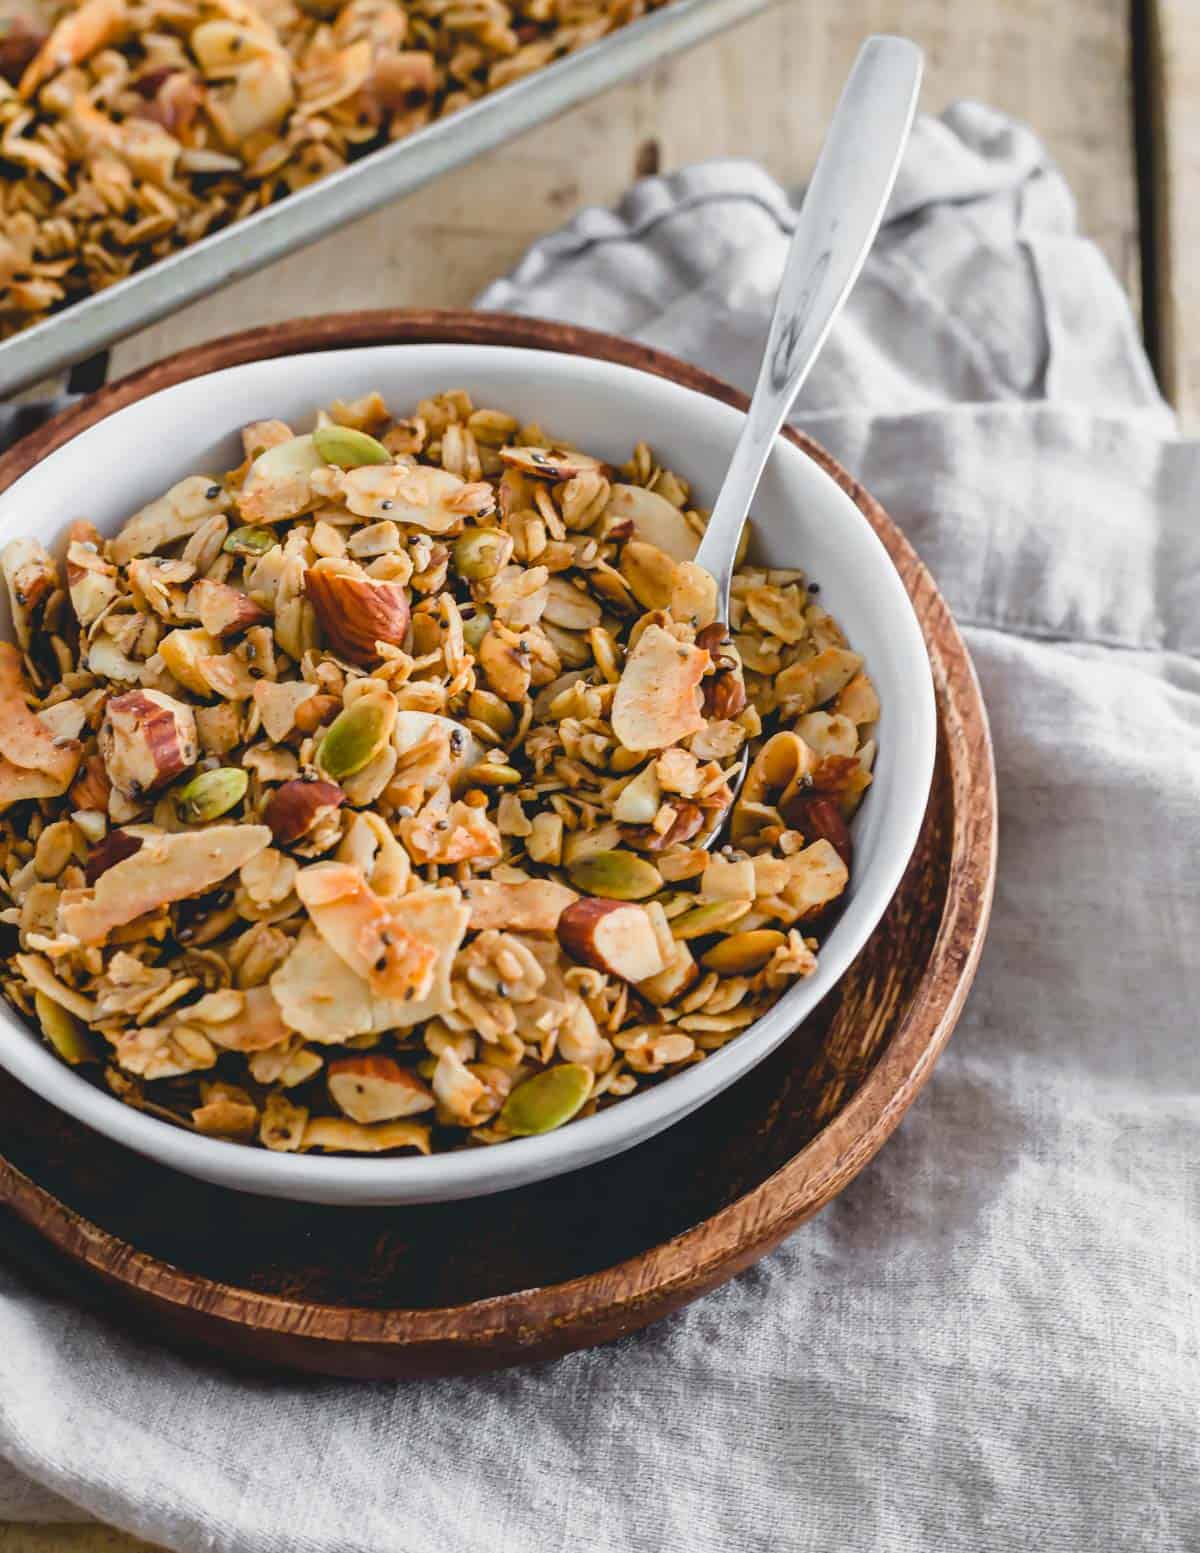 Gluten-free coconut almond granola in a bowl with a spoon.